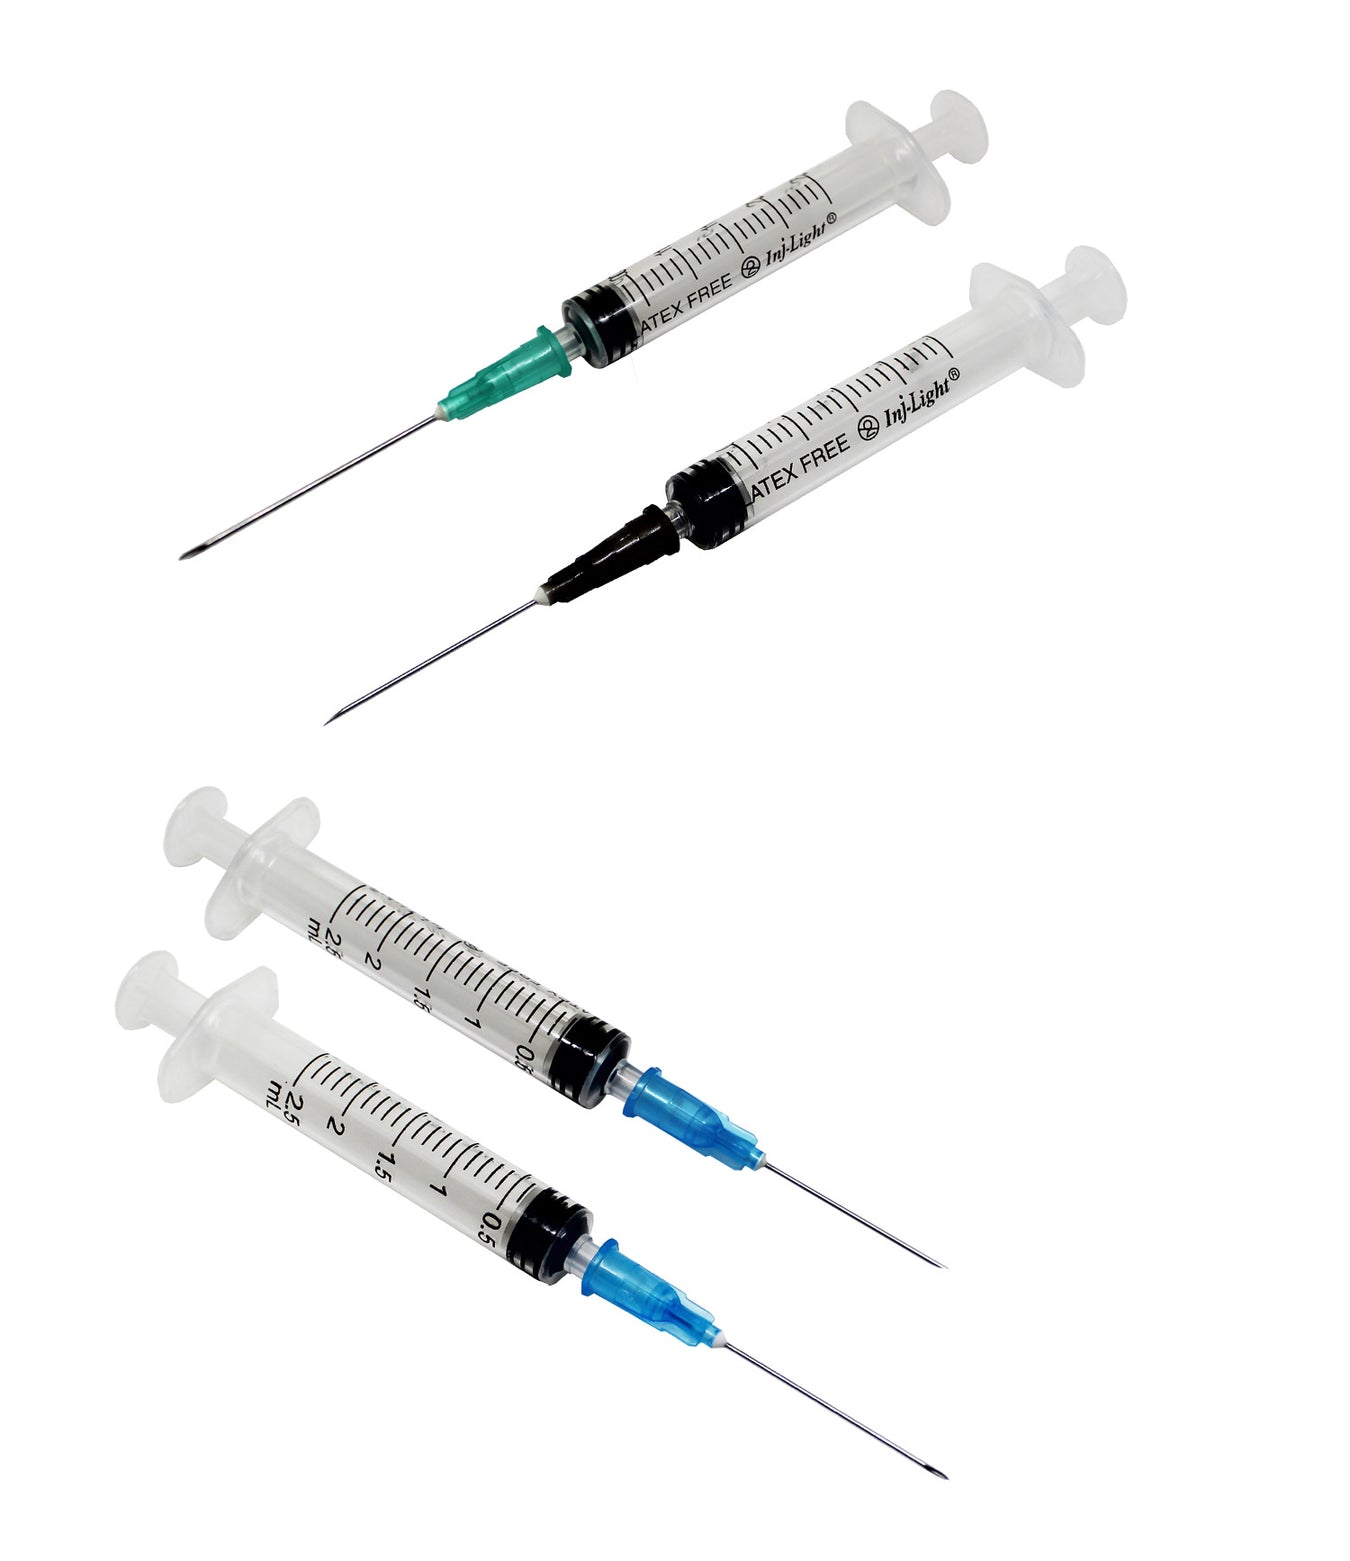 2.5ml syringe with 21g 22g 23g hypodermic needle, sterile latex free for injection disposable. 